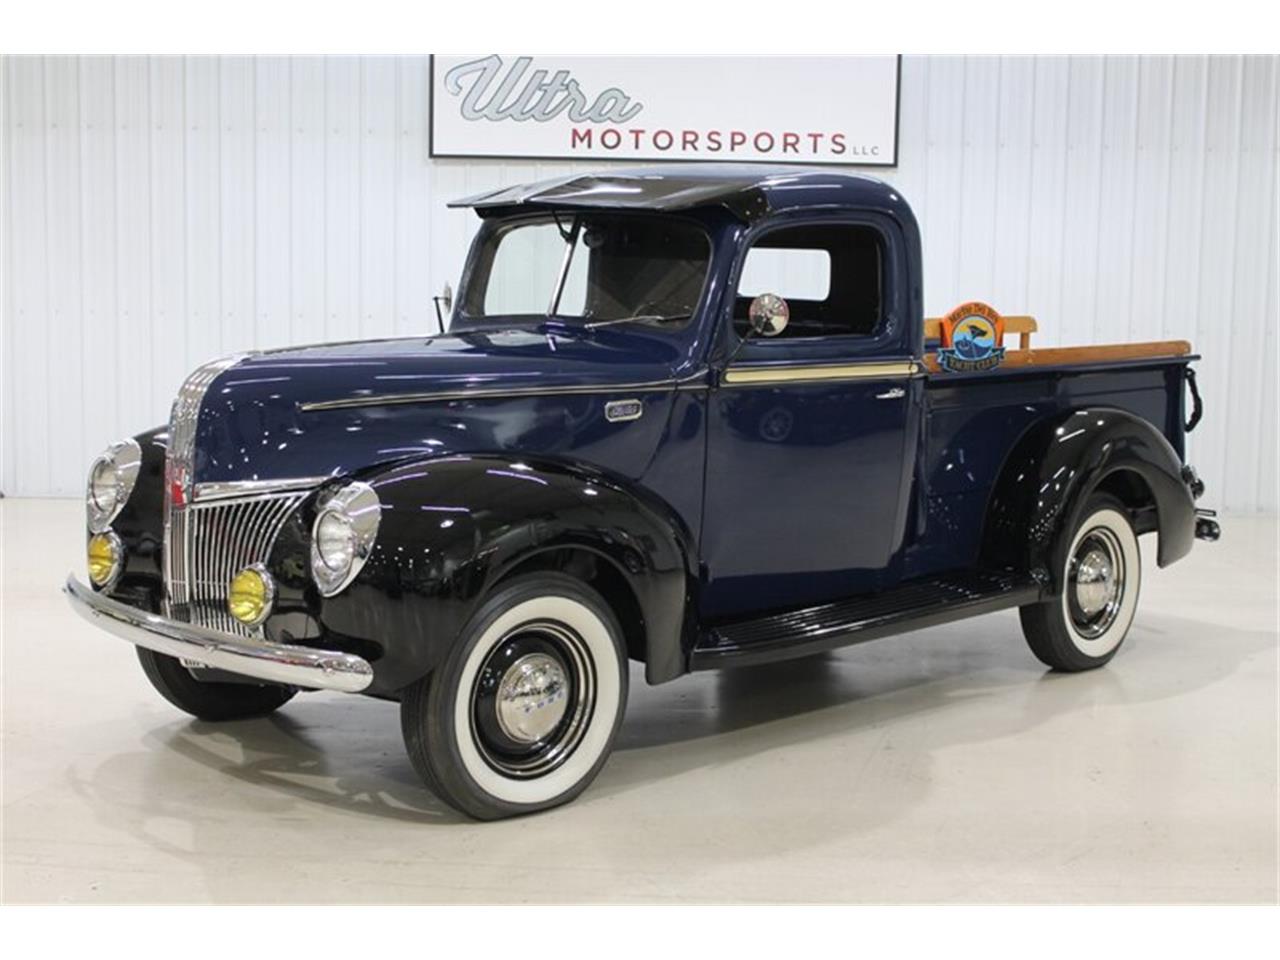 1941 Ford Pickup for Sale | 0 | CC-1293523